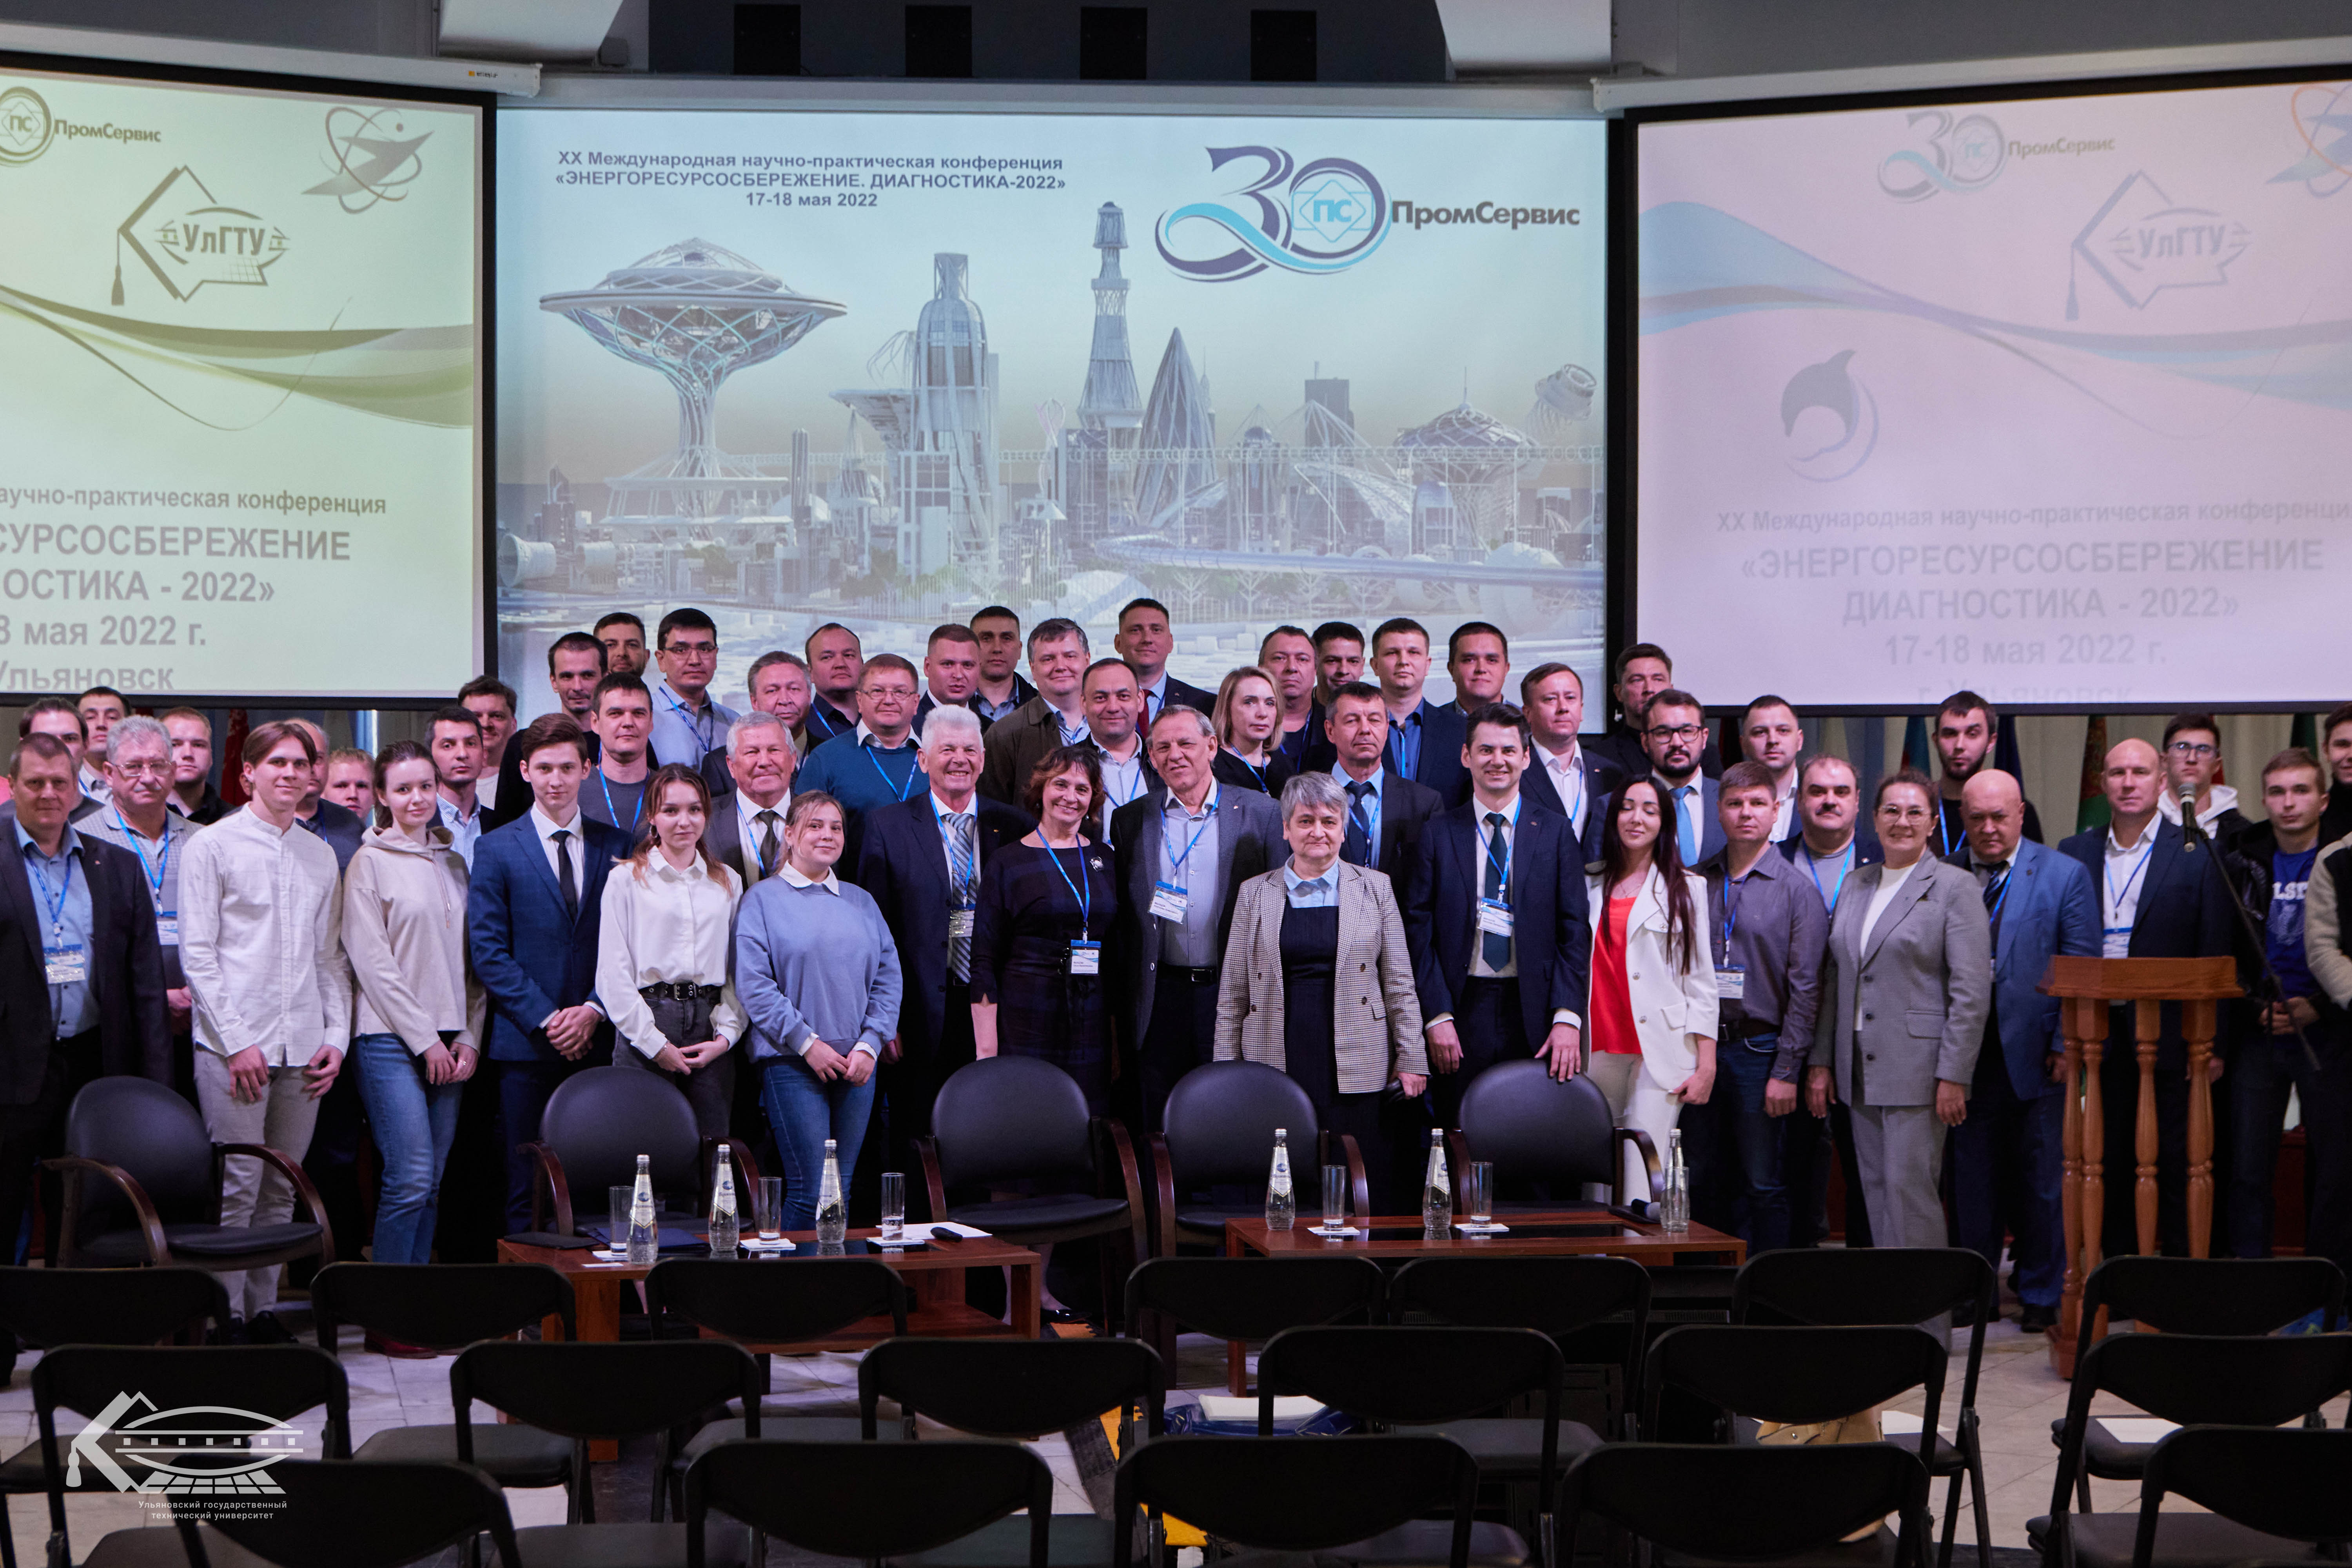 An international scientific-practical conference "Energy and Resource Saving. Diagnostics-2022" was held in Ulyanovsk State Technical University